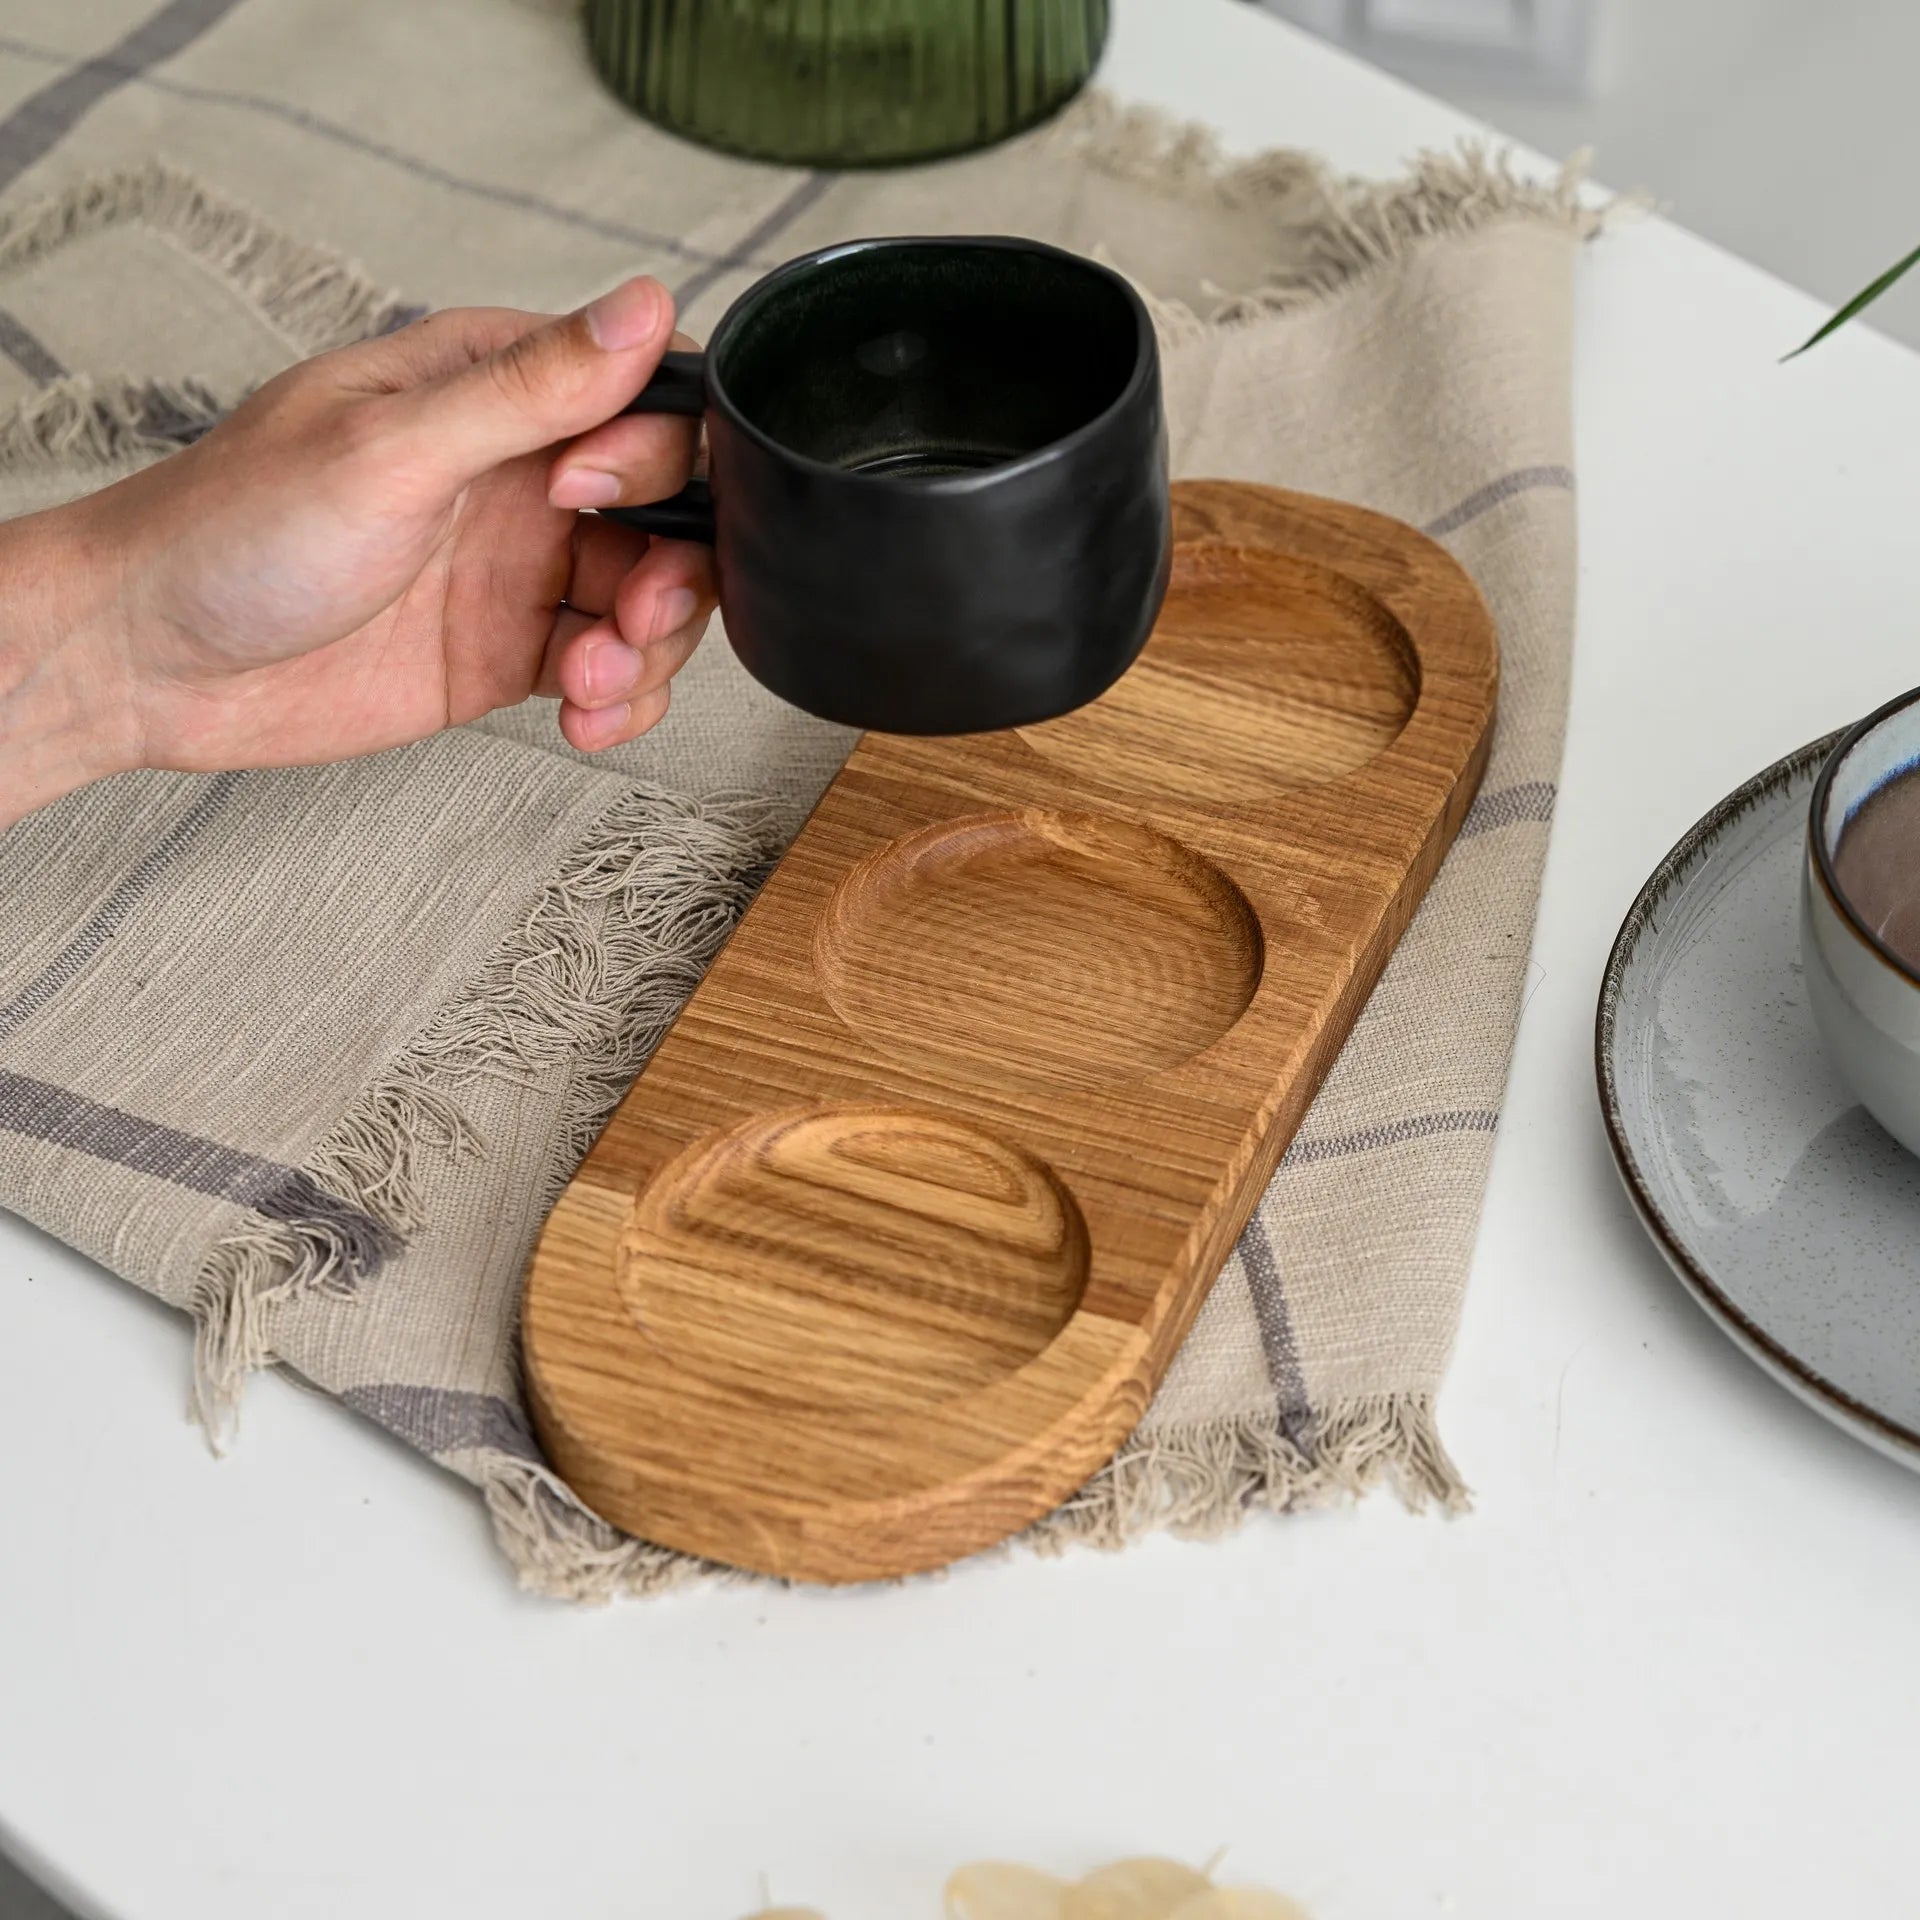 Coffee table tray made of rustic wood, customized for hotels, cafes, and restaurants to enhance service and decor.